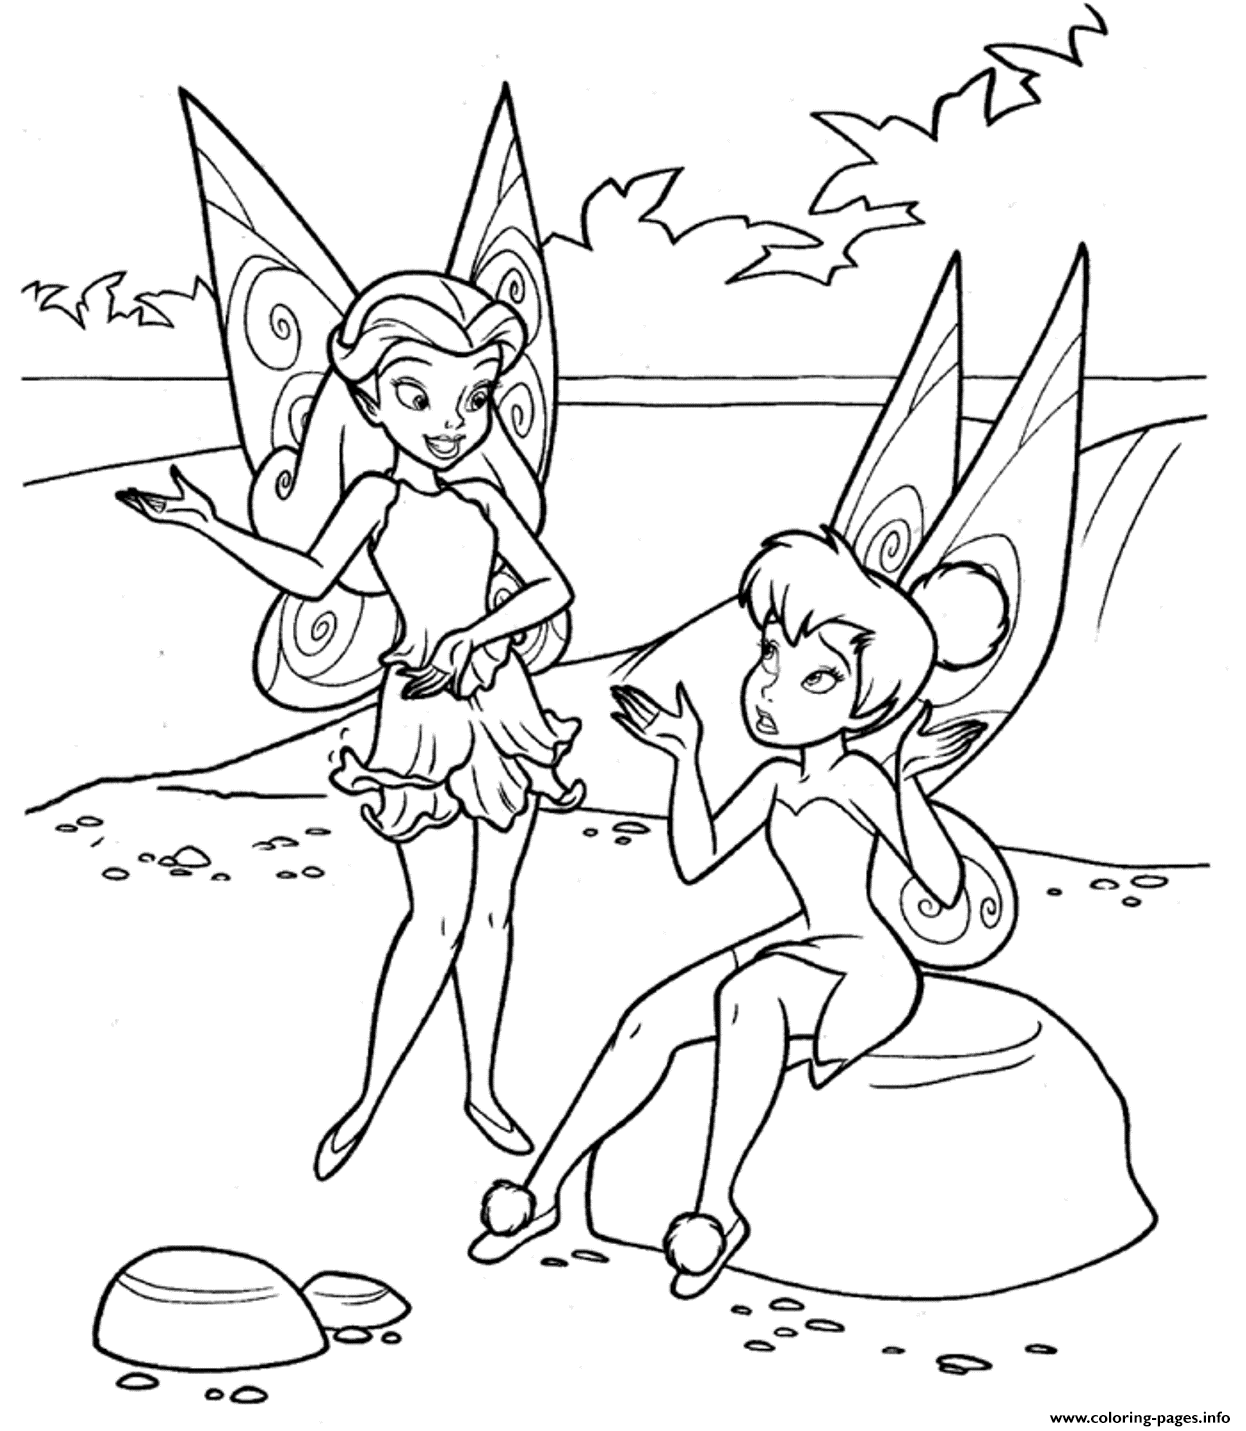 Tinkerbell S For Kids8d41 coloring